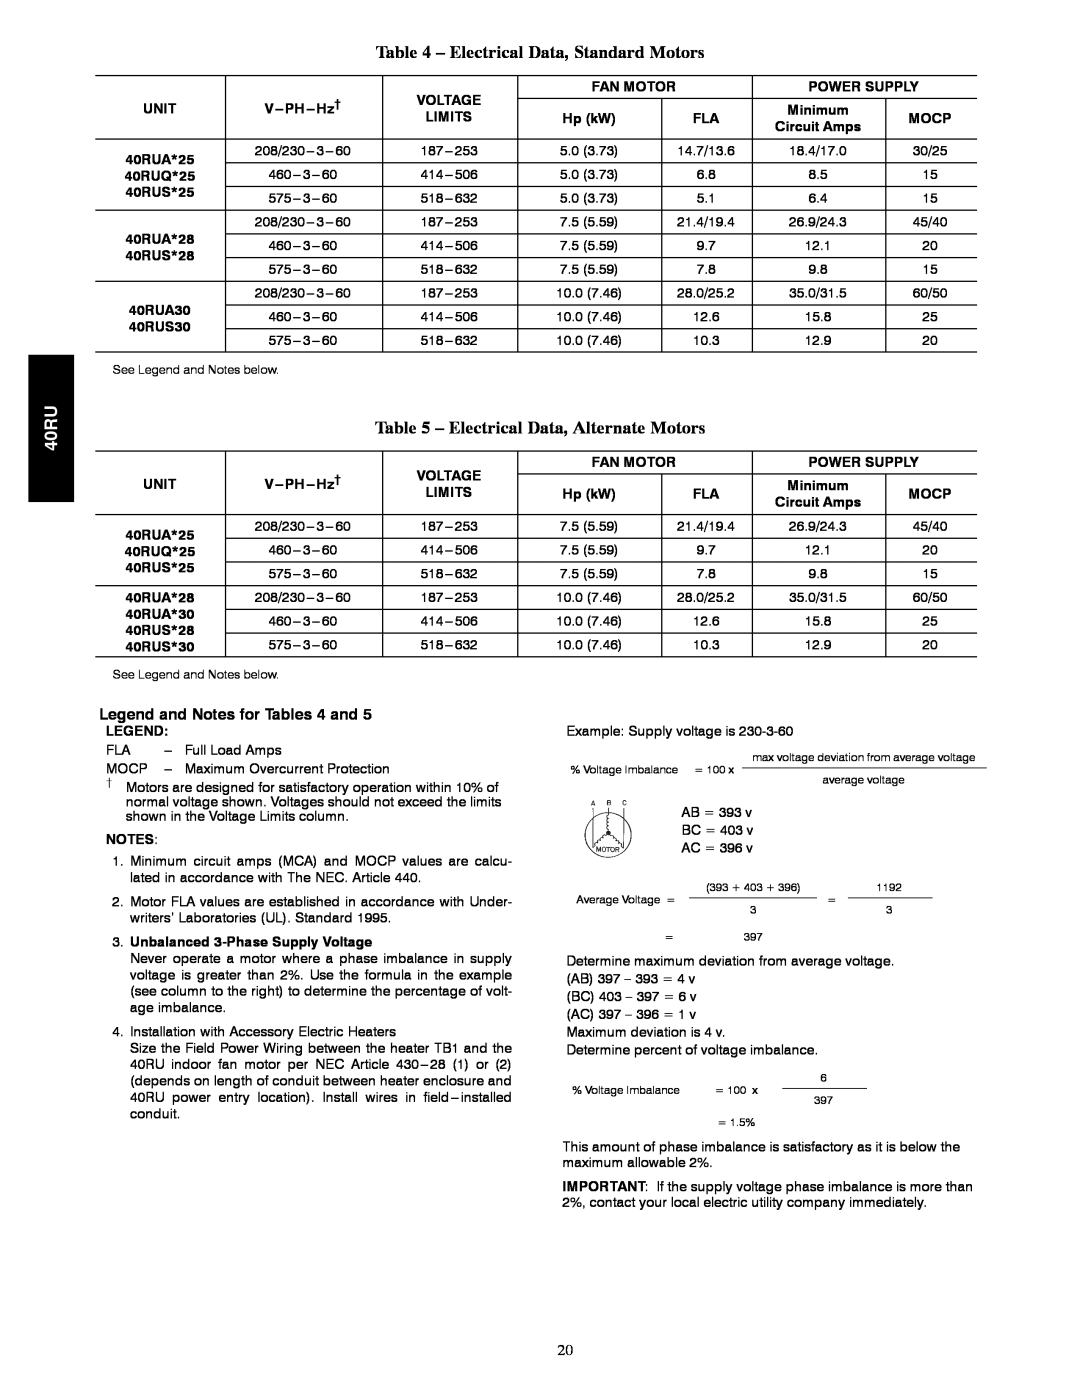 Carrier 40RU manual Electrical Data, Standard Motors, Electrical Data, Alternate Motors, Legend and Notes for Tables 4 and 